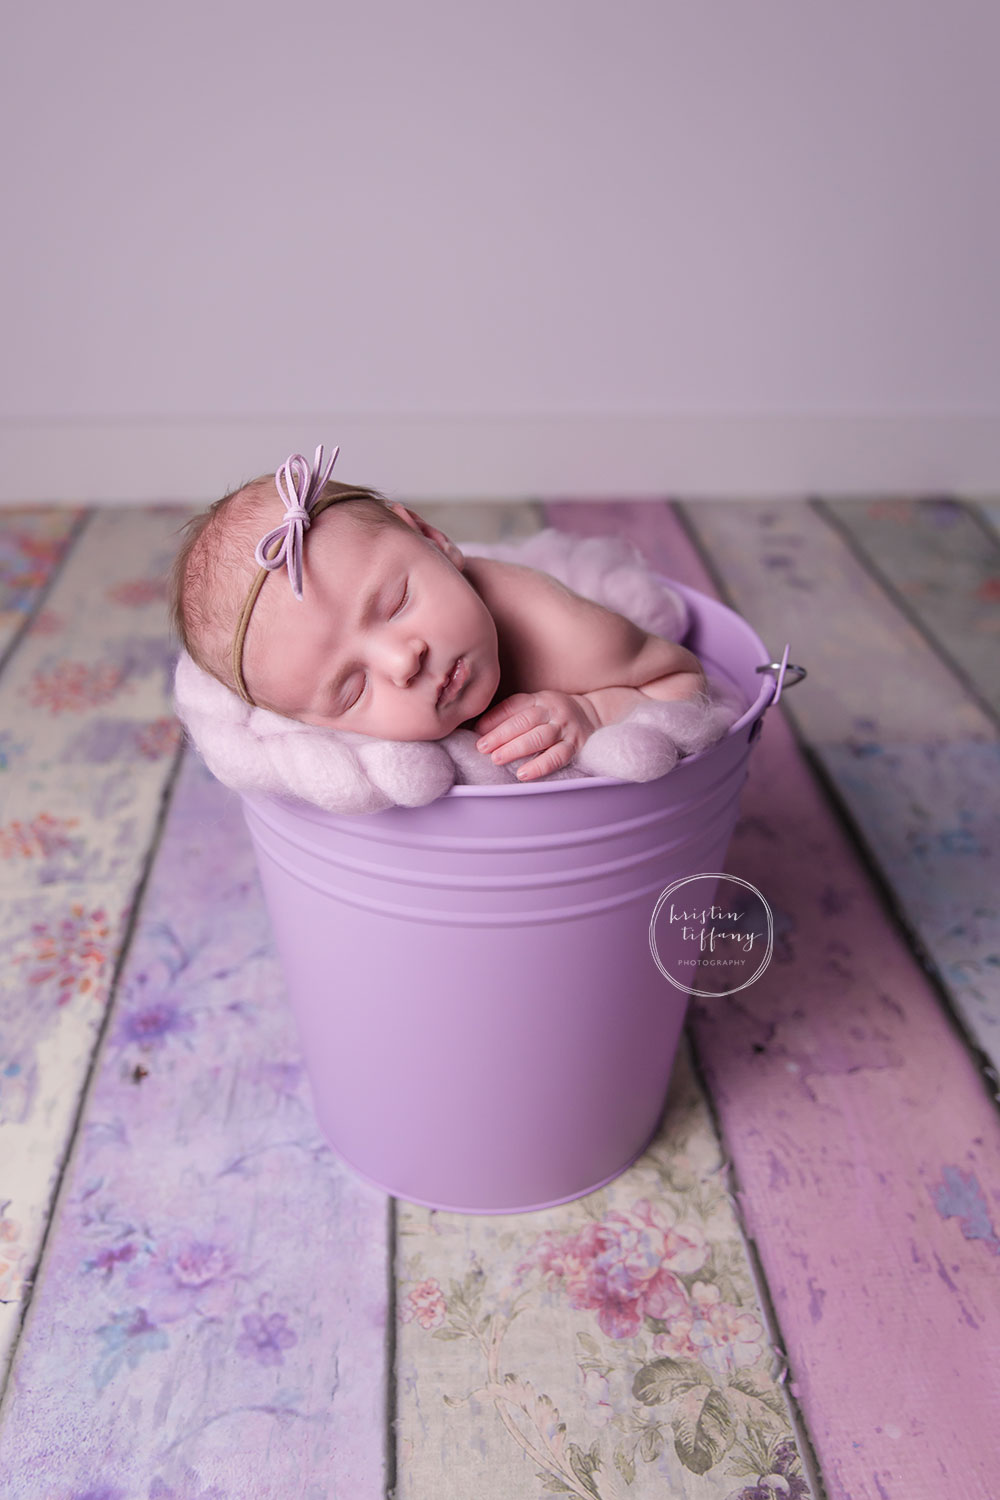 a newborn photo of a baby girl posed in a bucket